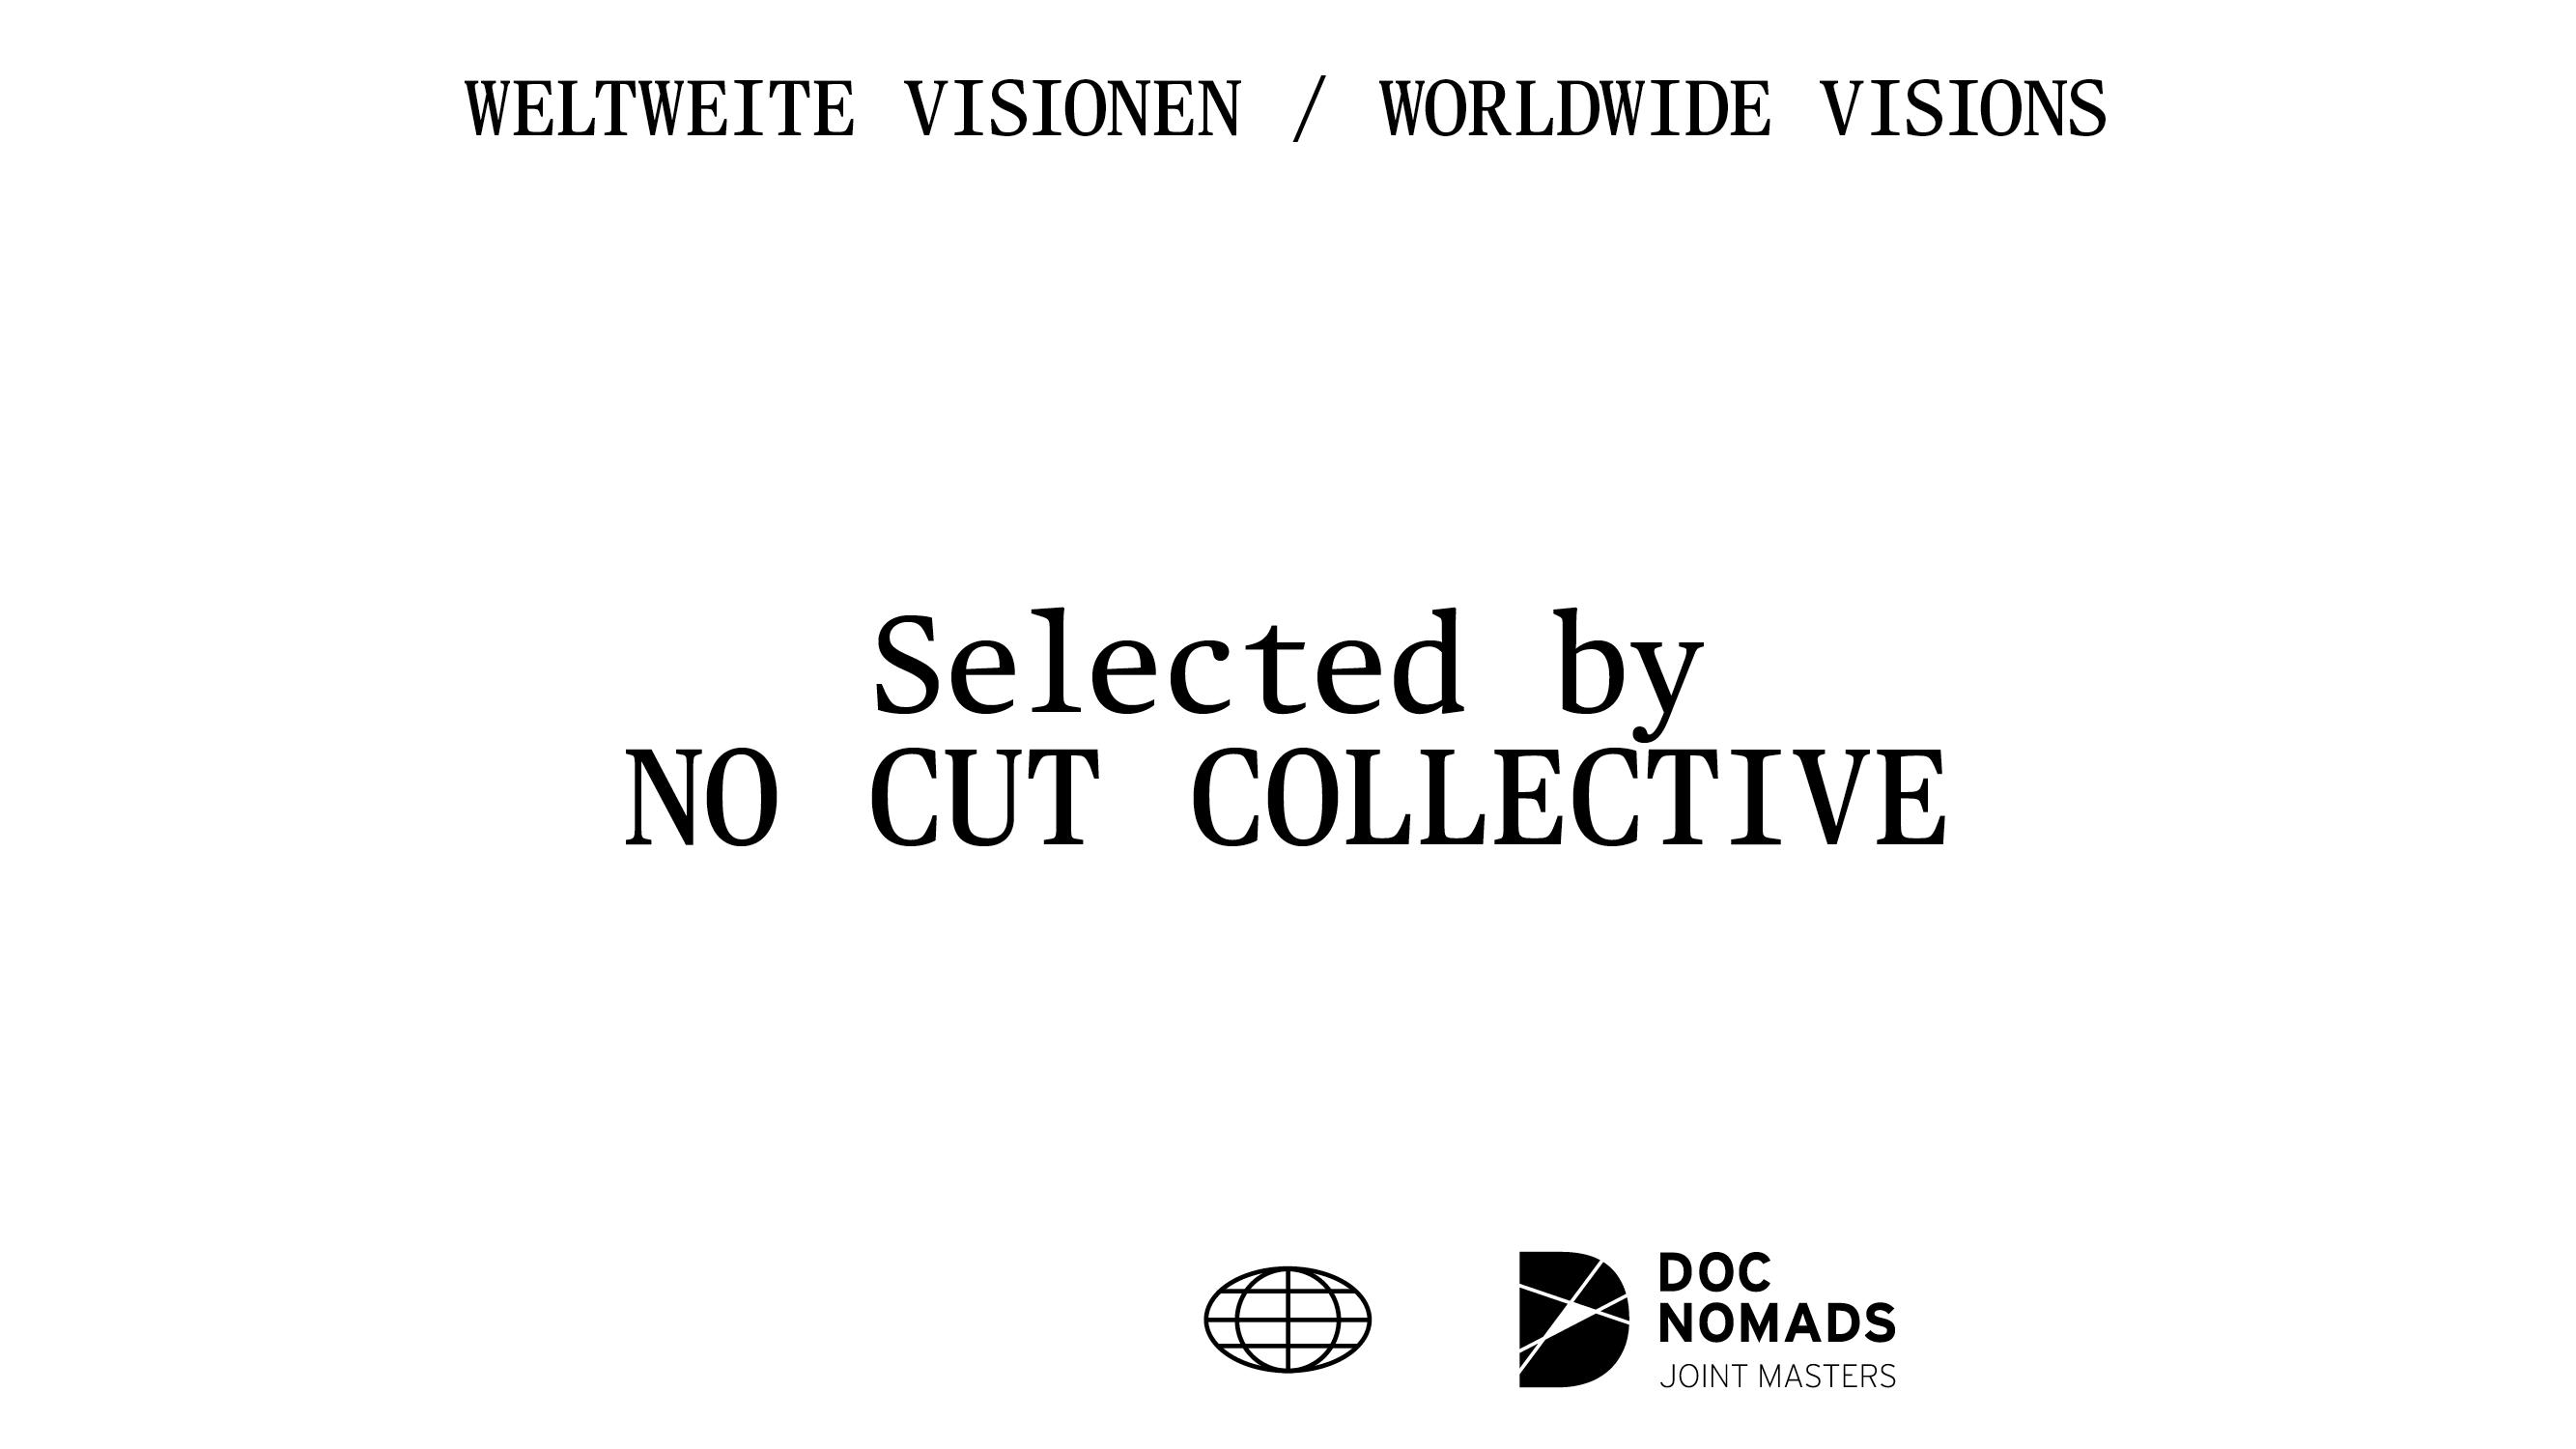 SELECTED BY NO CUT COLLECTIVE